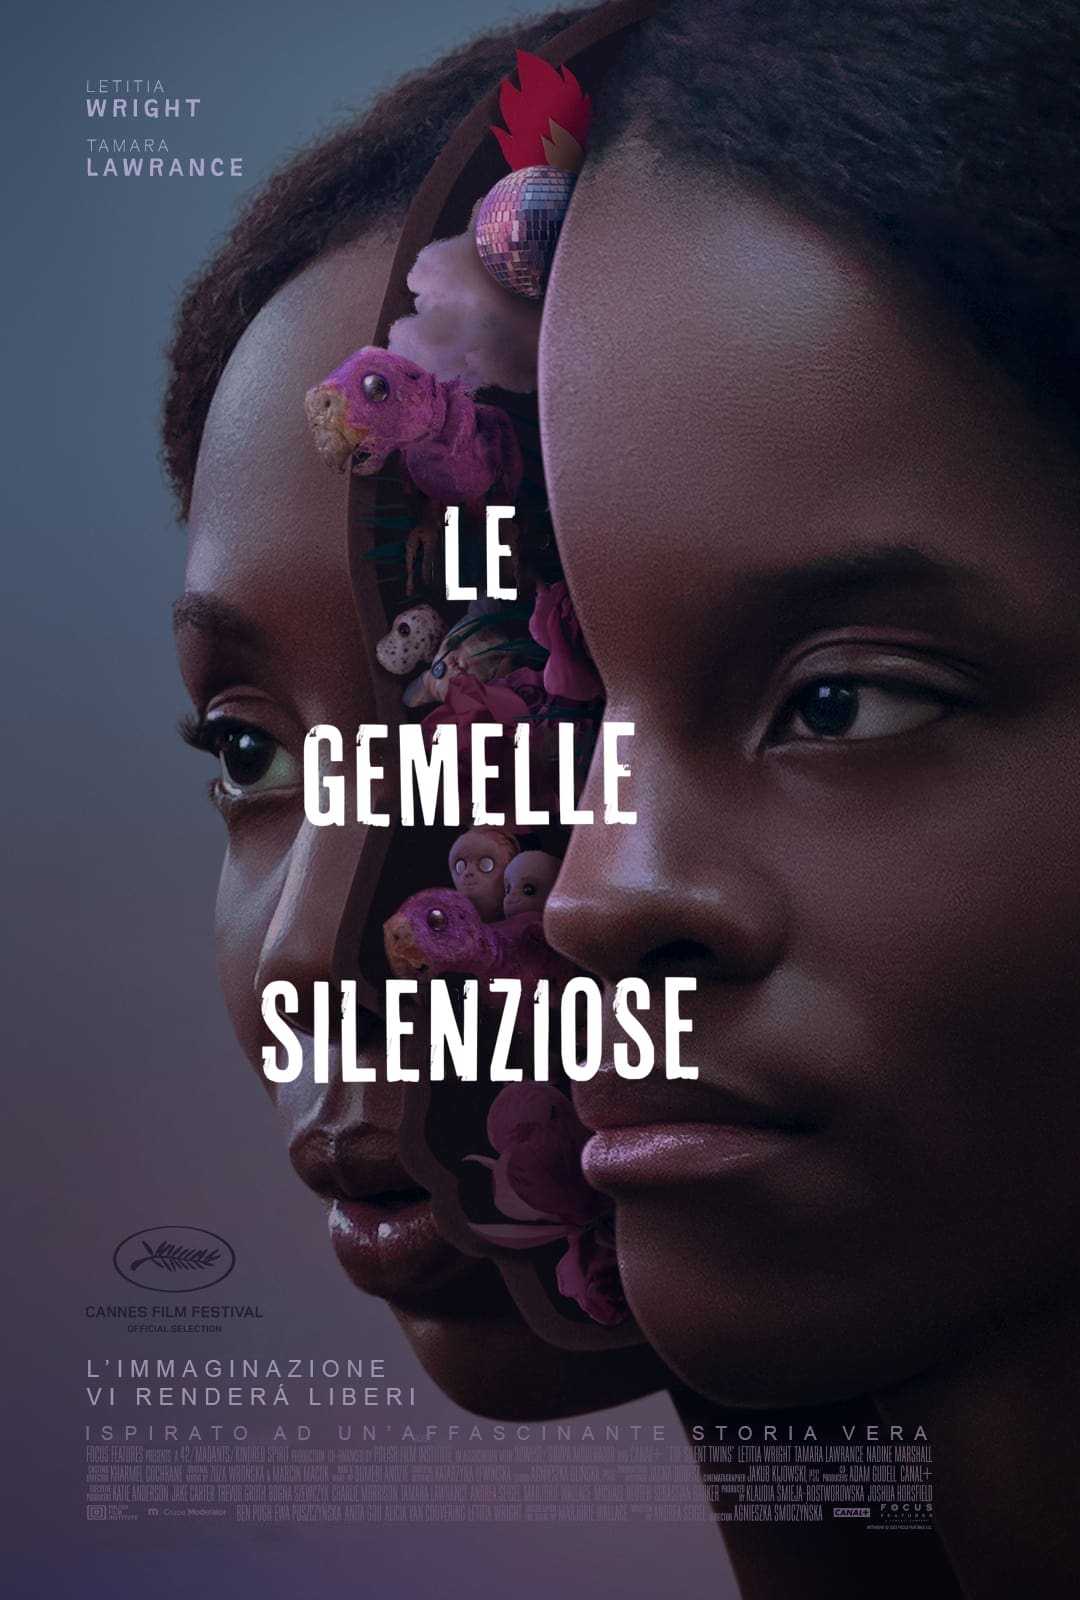 Le gemelle silenziose in streaming